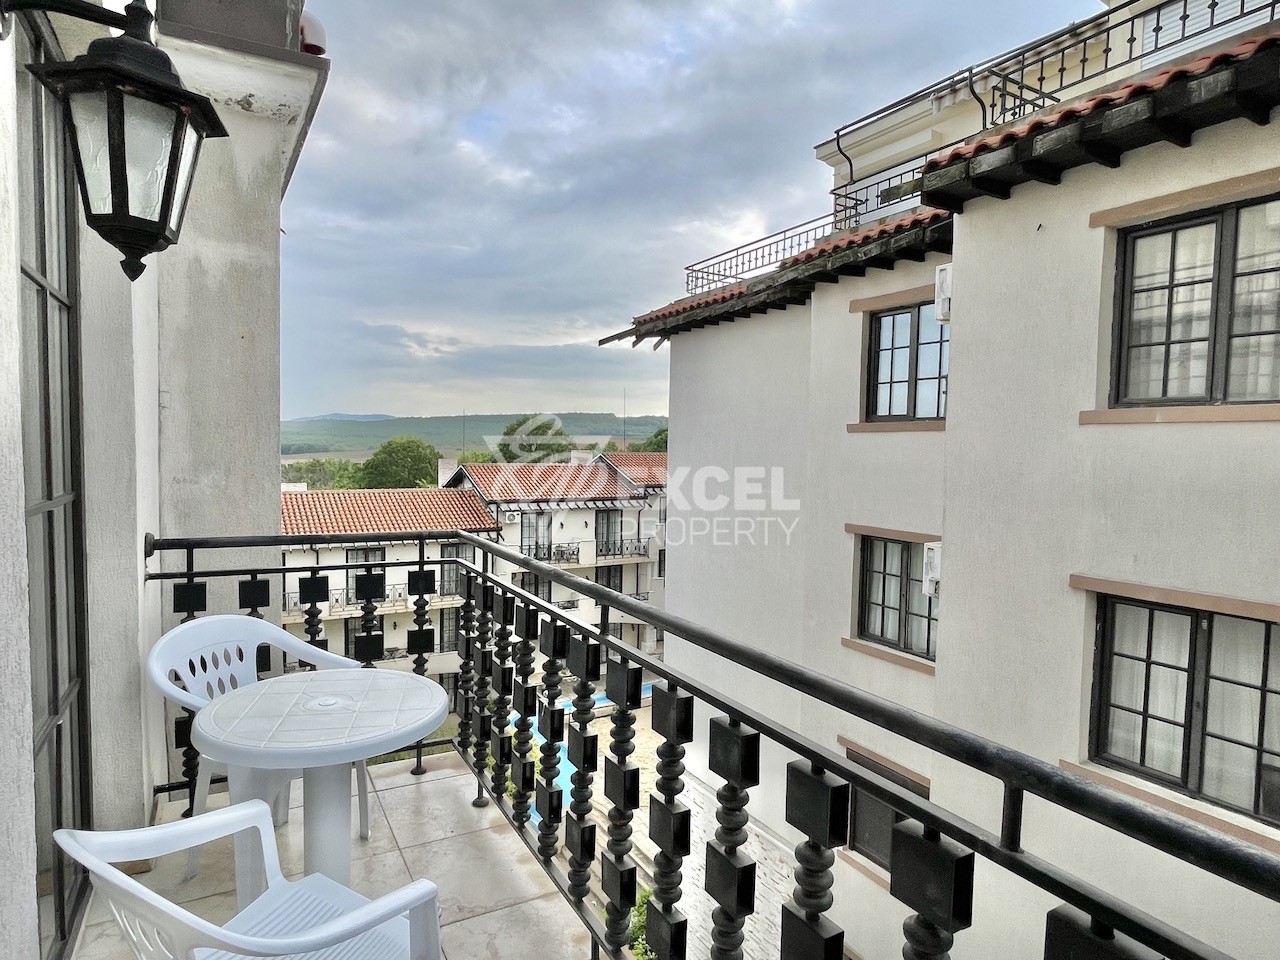 One-bedroom apartment in Obzor, only 150 m from the sea - the Cllif complex